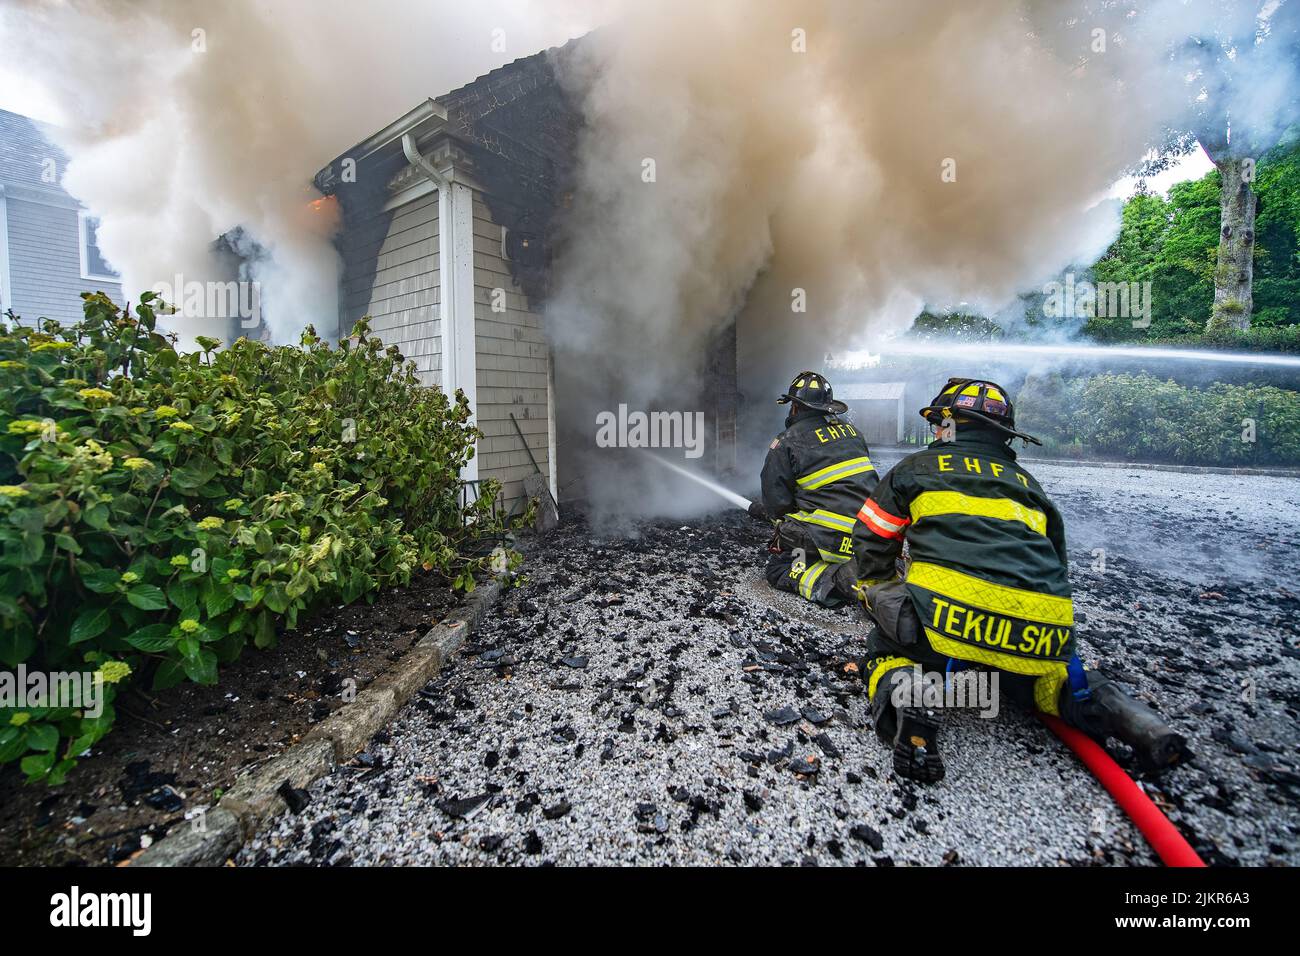 The East Hampton Fire Department was dispatched to 11 Roberts Lane at 6:34 p.m. on Sunday, June 7th, 2020 for a reported working structure fire in a g Stock Photo